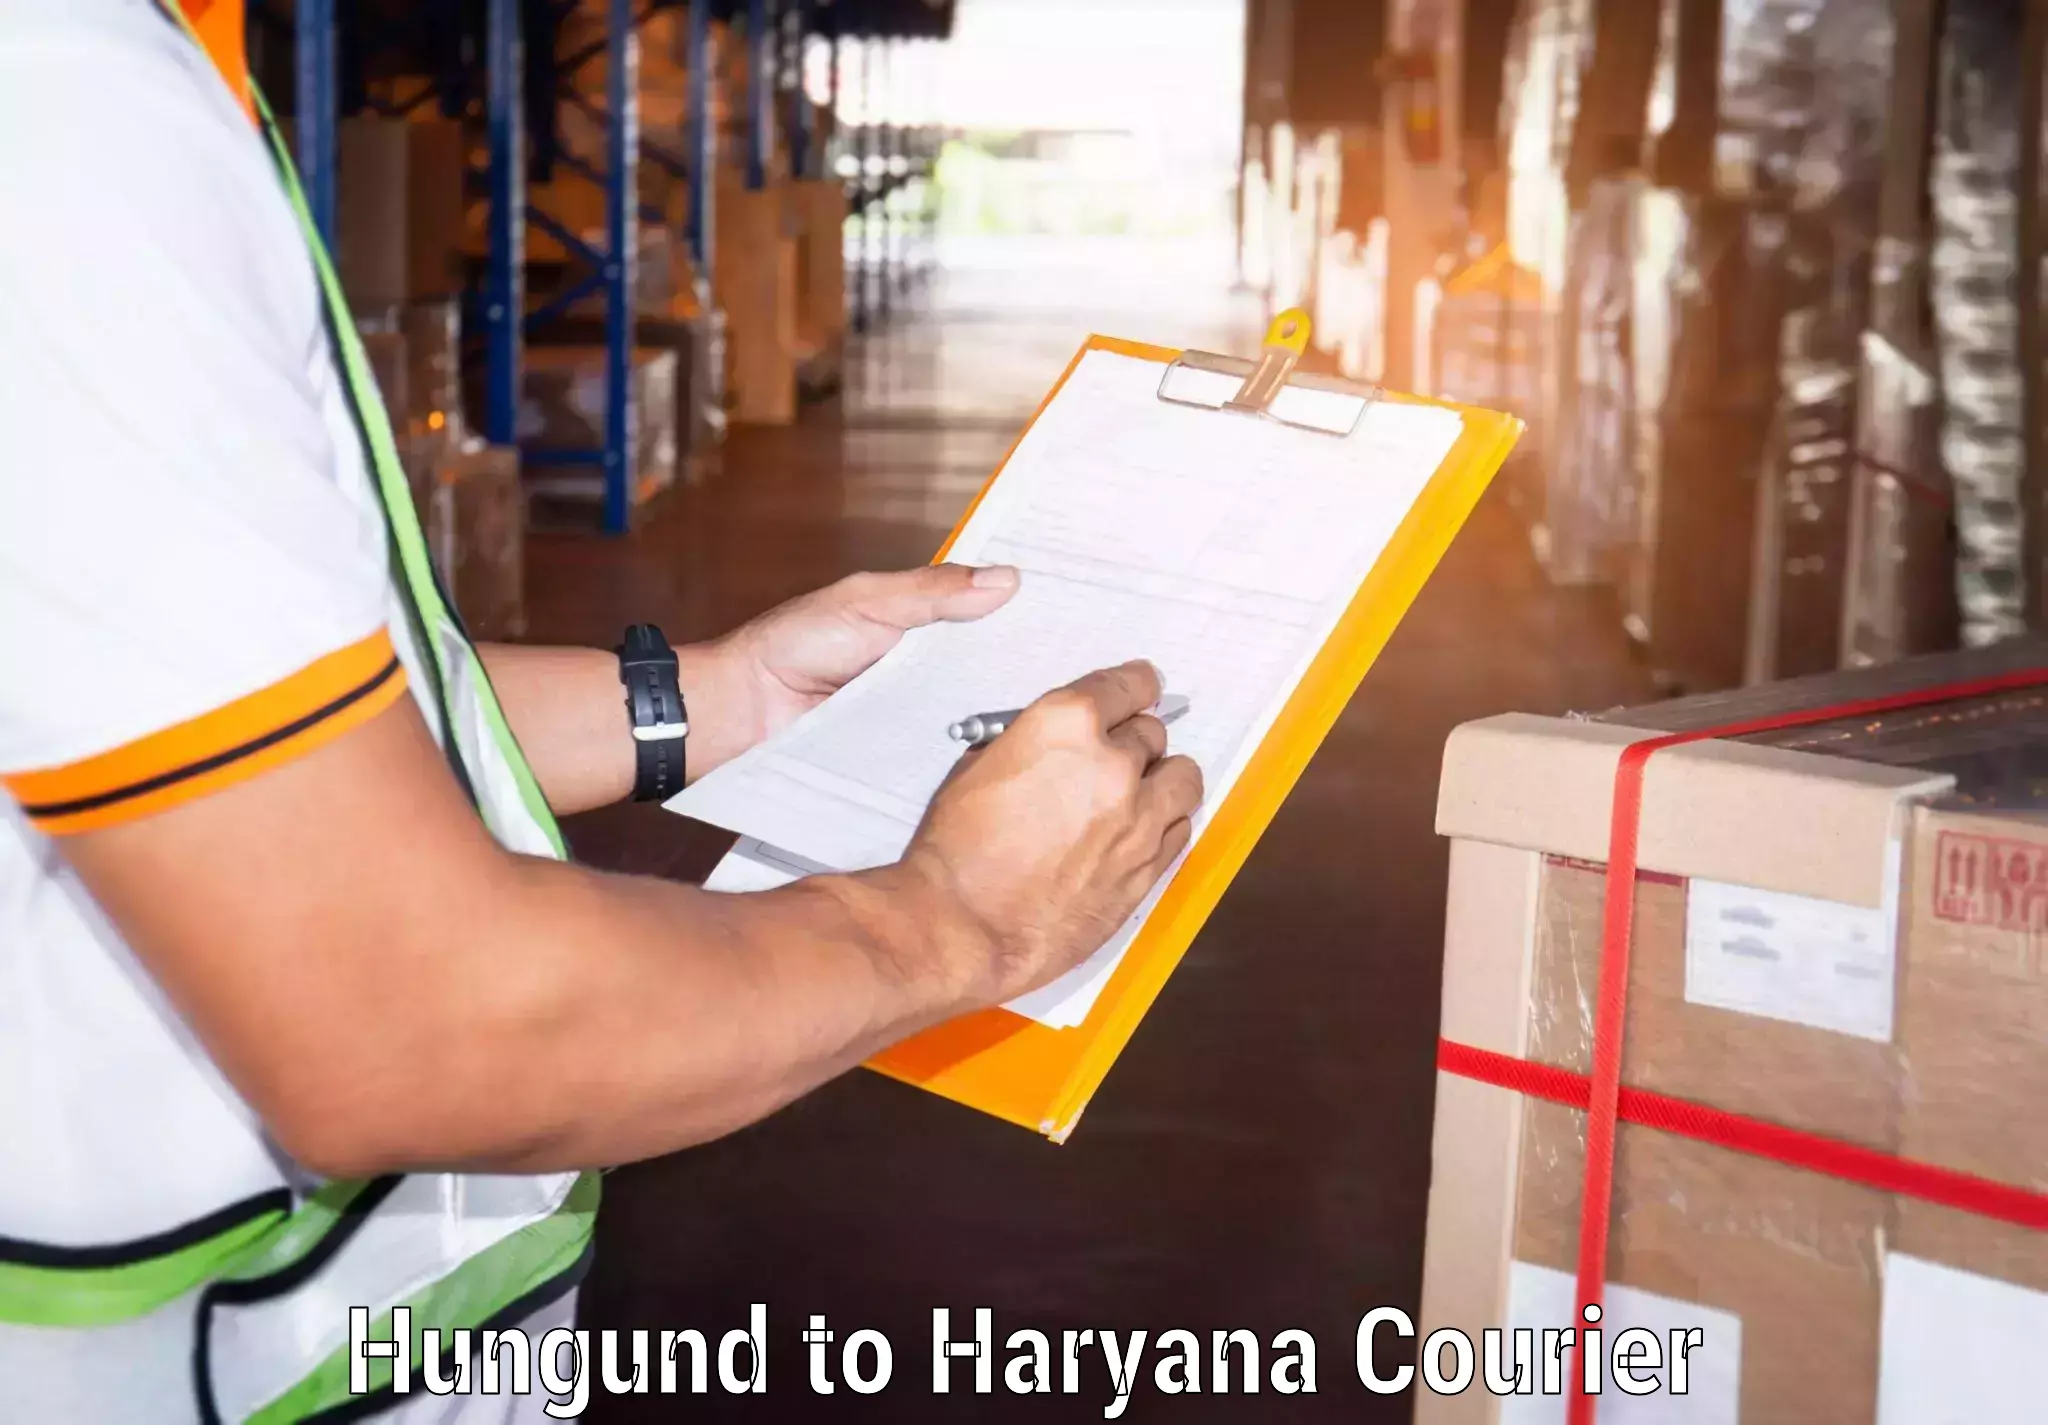 Global courier networks Hungund to Panipat